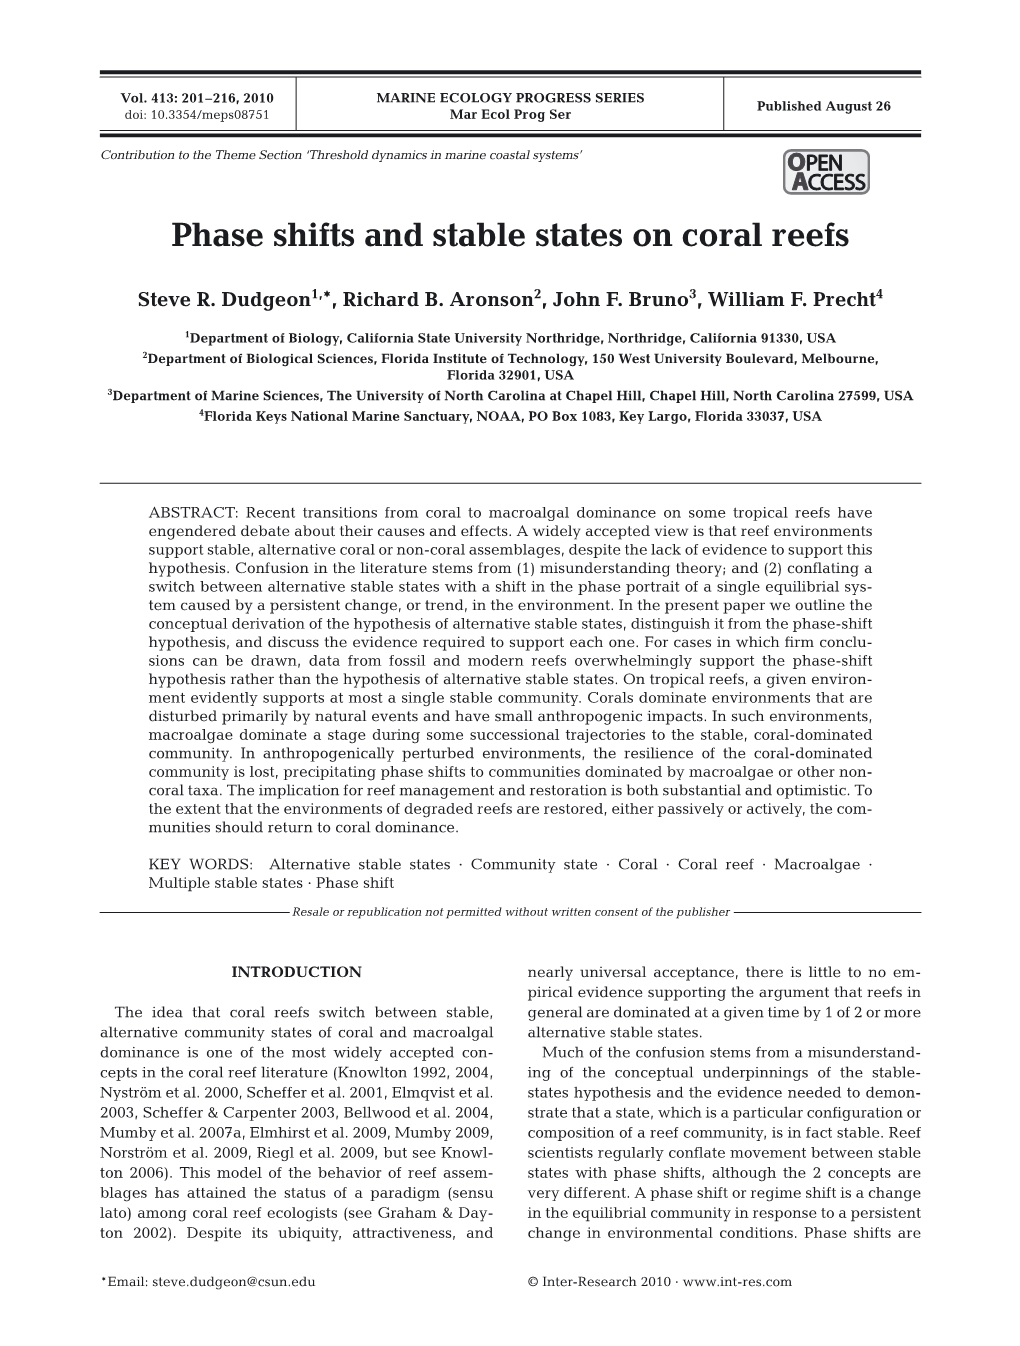 Phase Shifts and Stable States on Coral Reefs